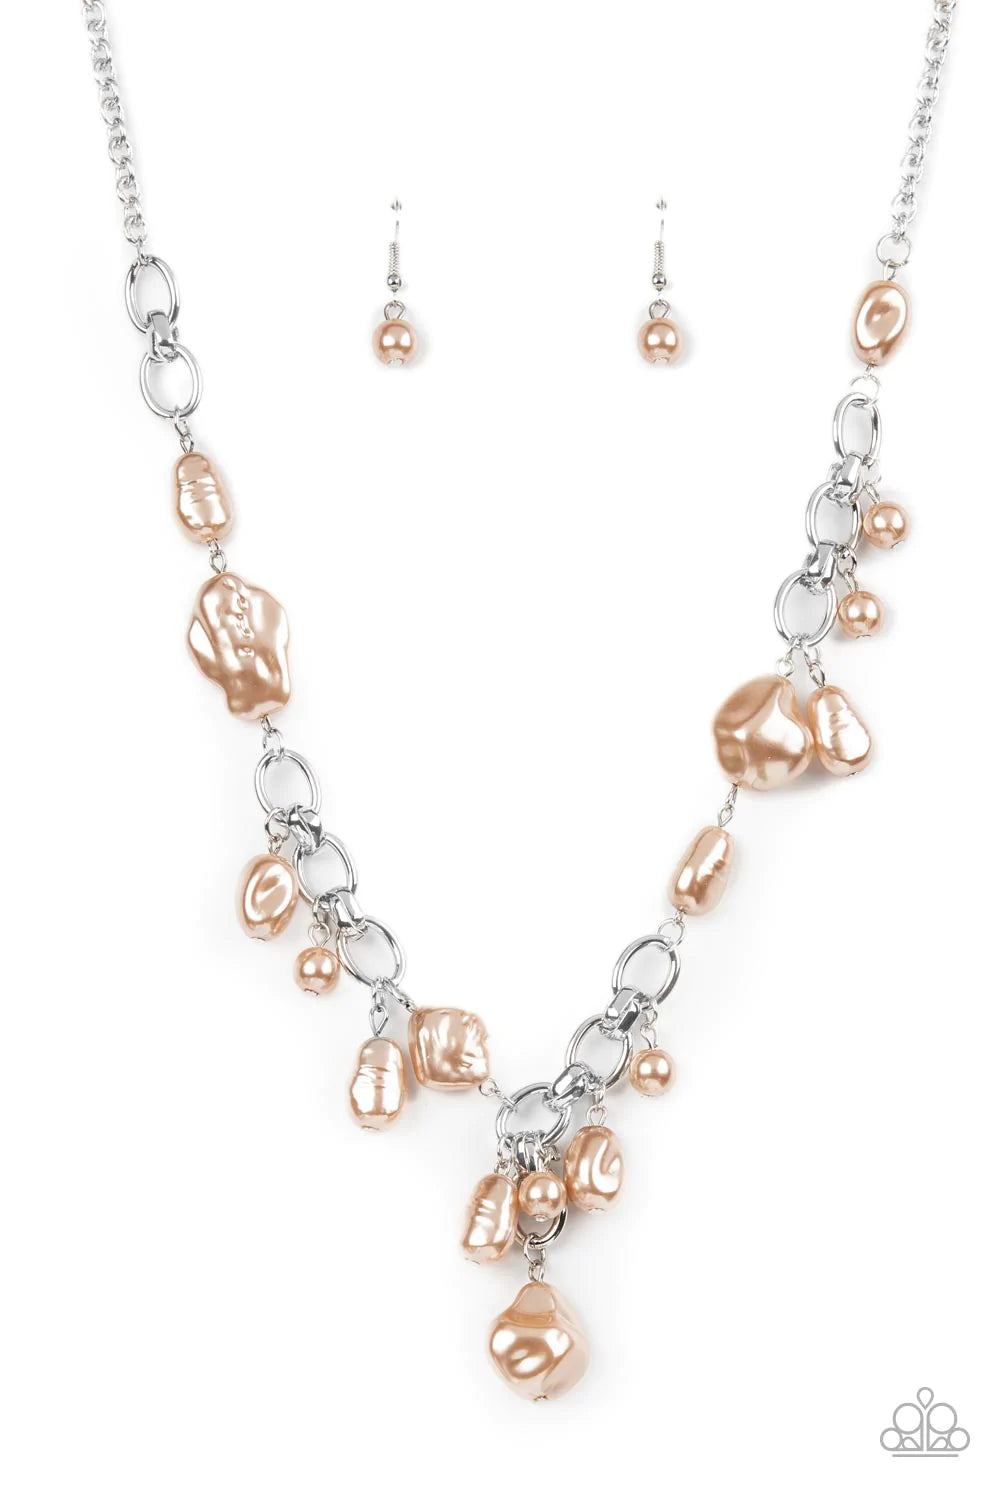 Paparazzi Accessories Nautical Nouveau - Brown A modern collection of asymmetrical pearly brown beads adorn sections of a chunky silver chain below the collar. Matching pearly beads sporadically trickle from the chain, resulting in a timelessly tasseled d